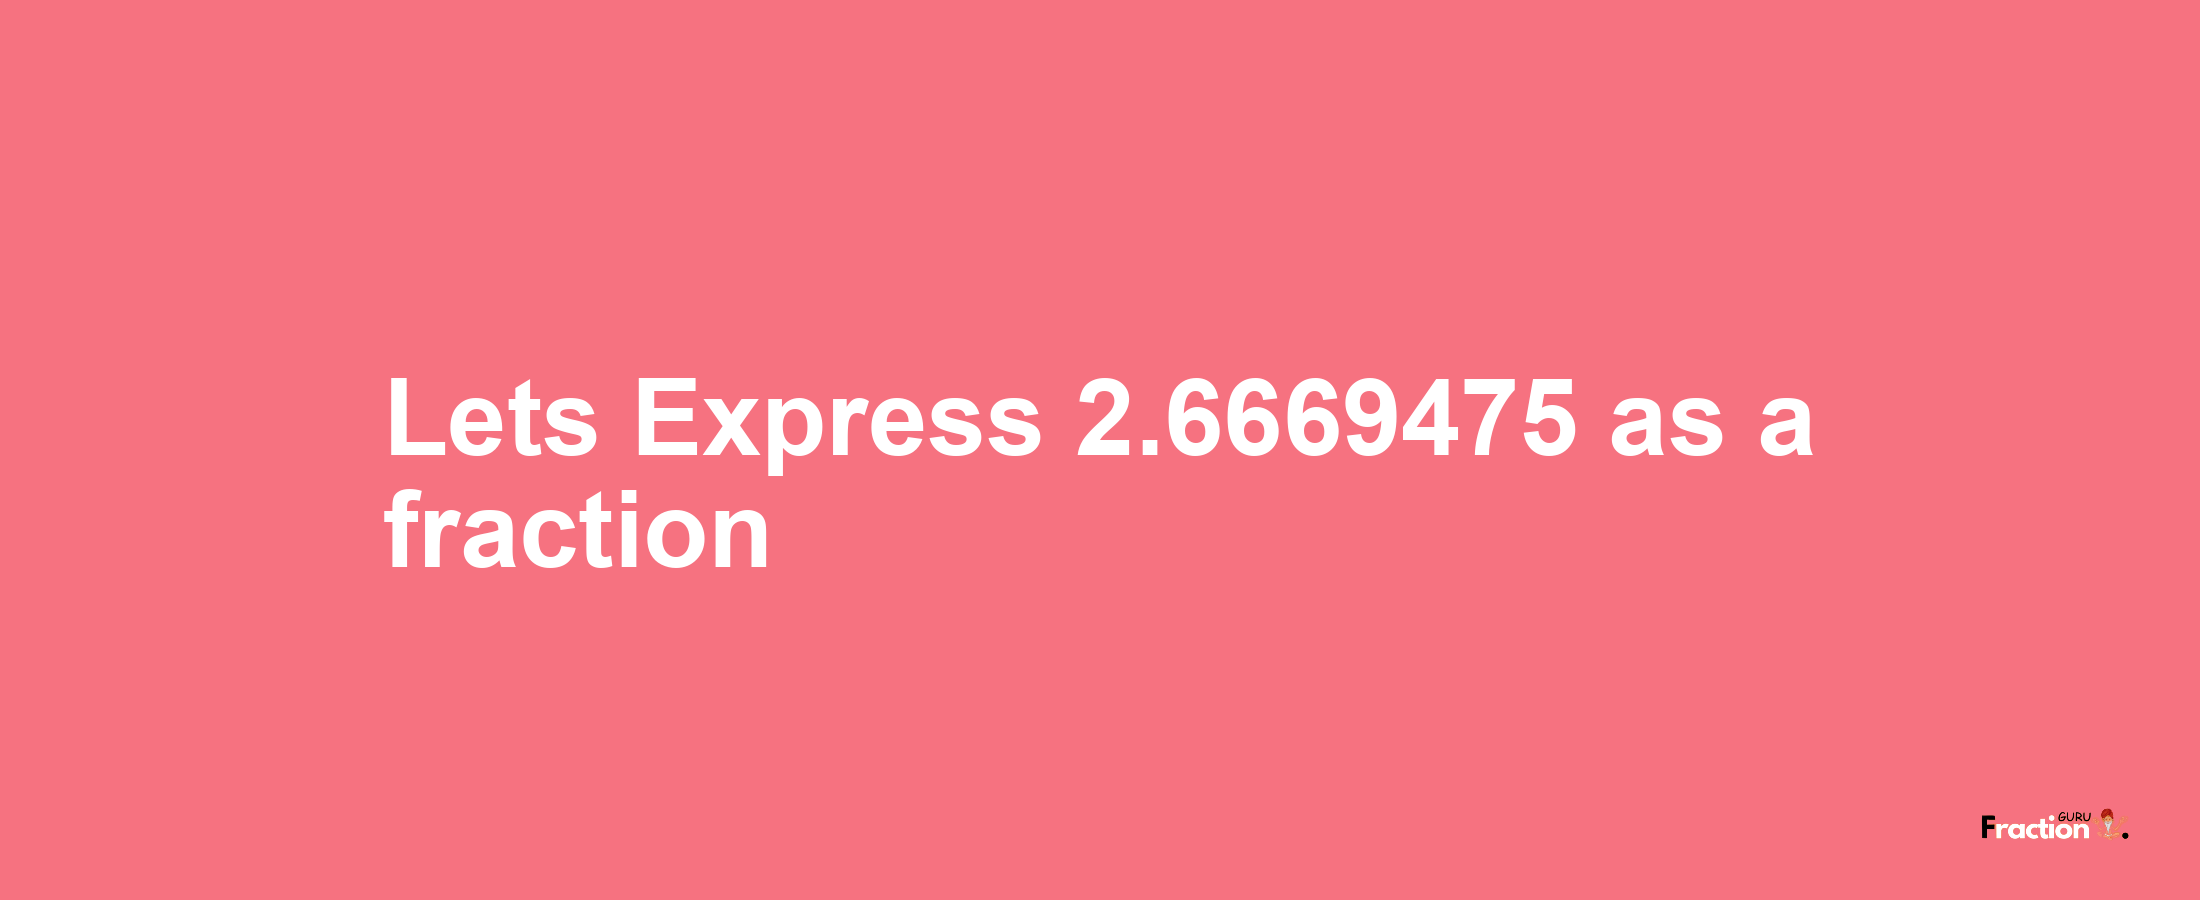 Lets Express 2.6669475 as afraction